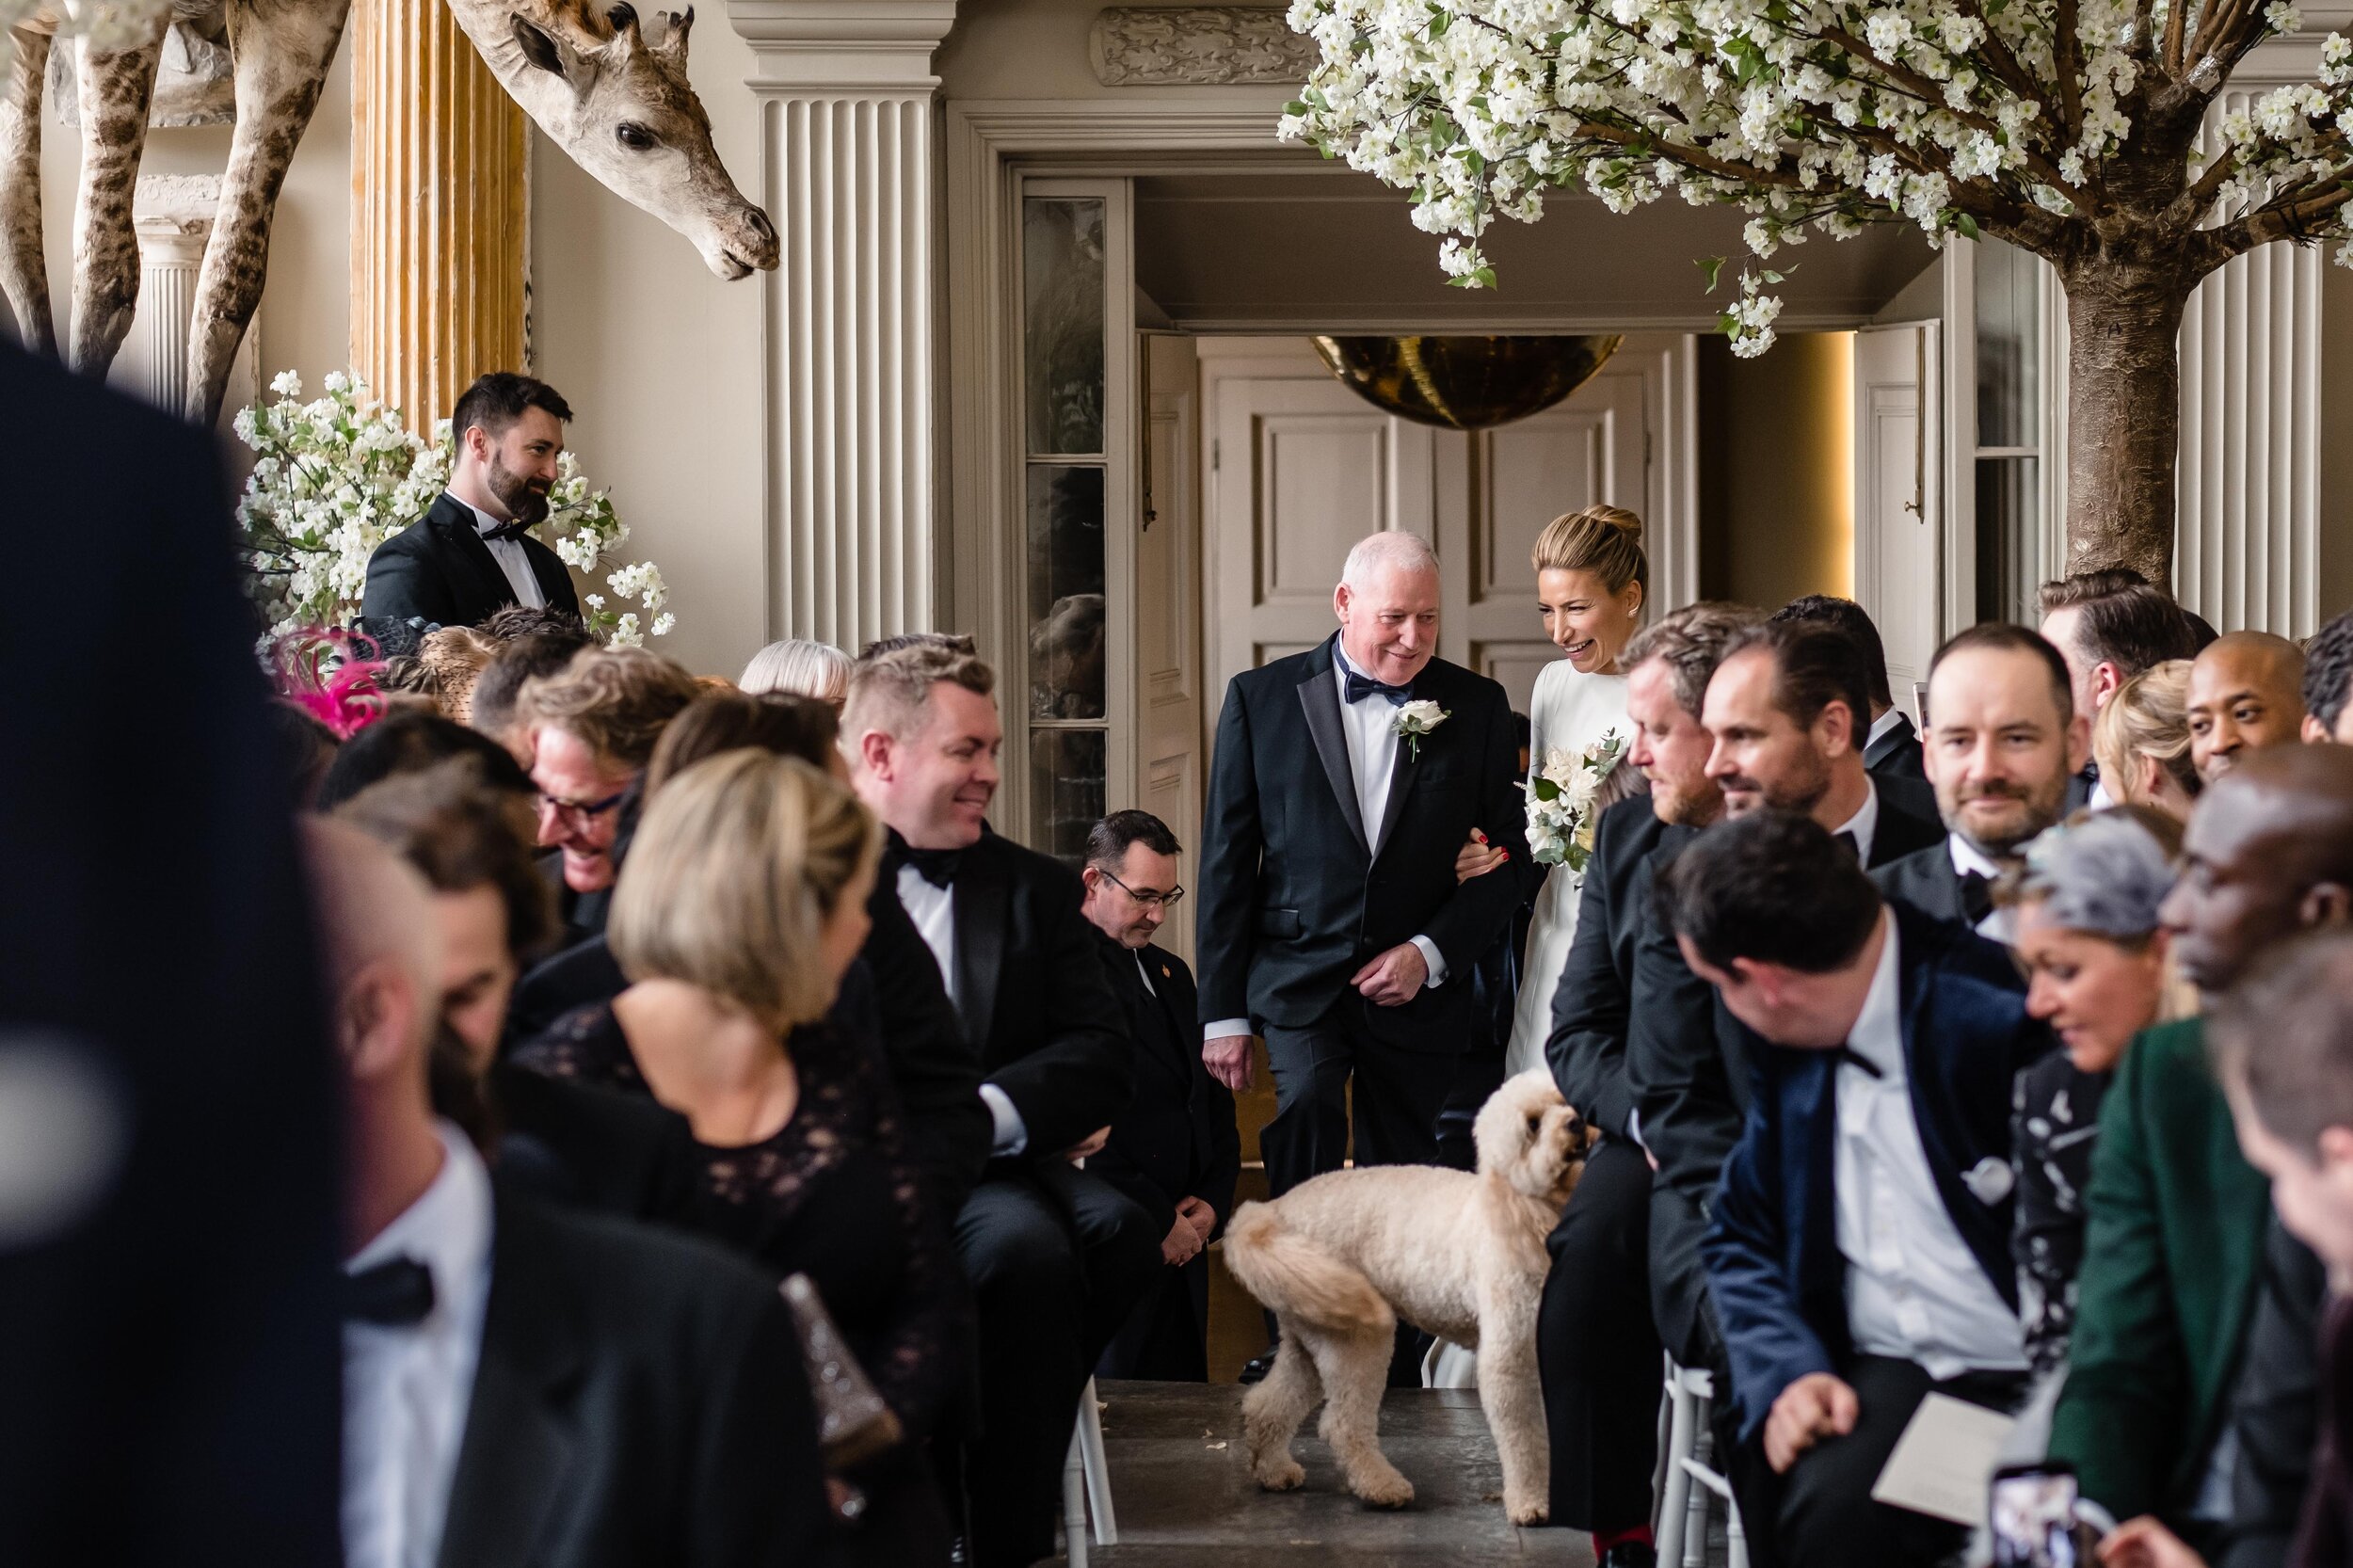 view of all the guests watching the bride and her father walk up the aisle with a dog